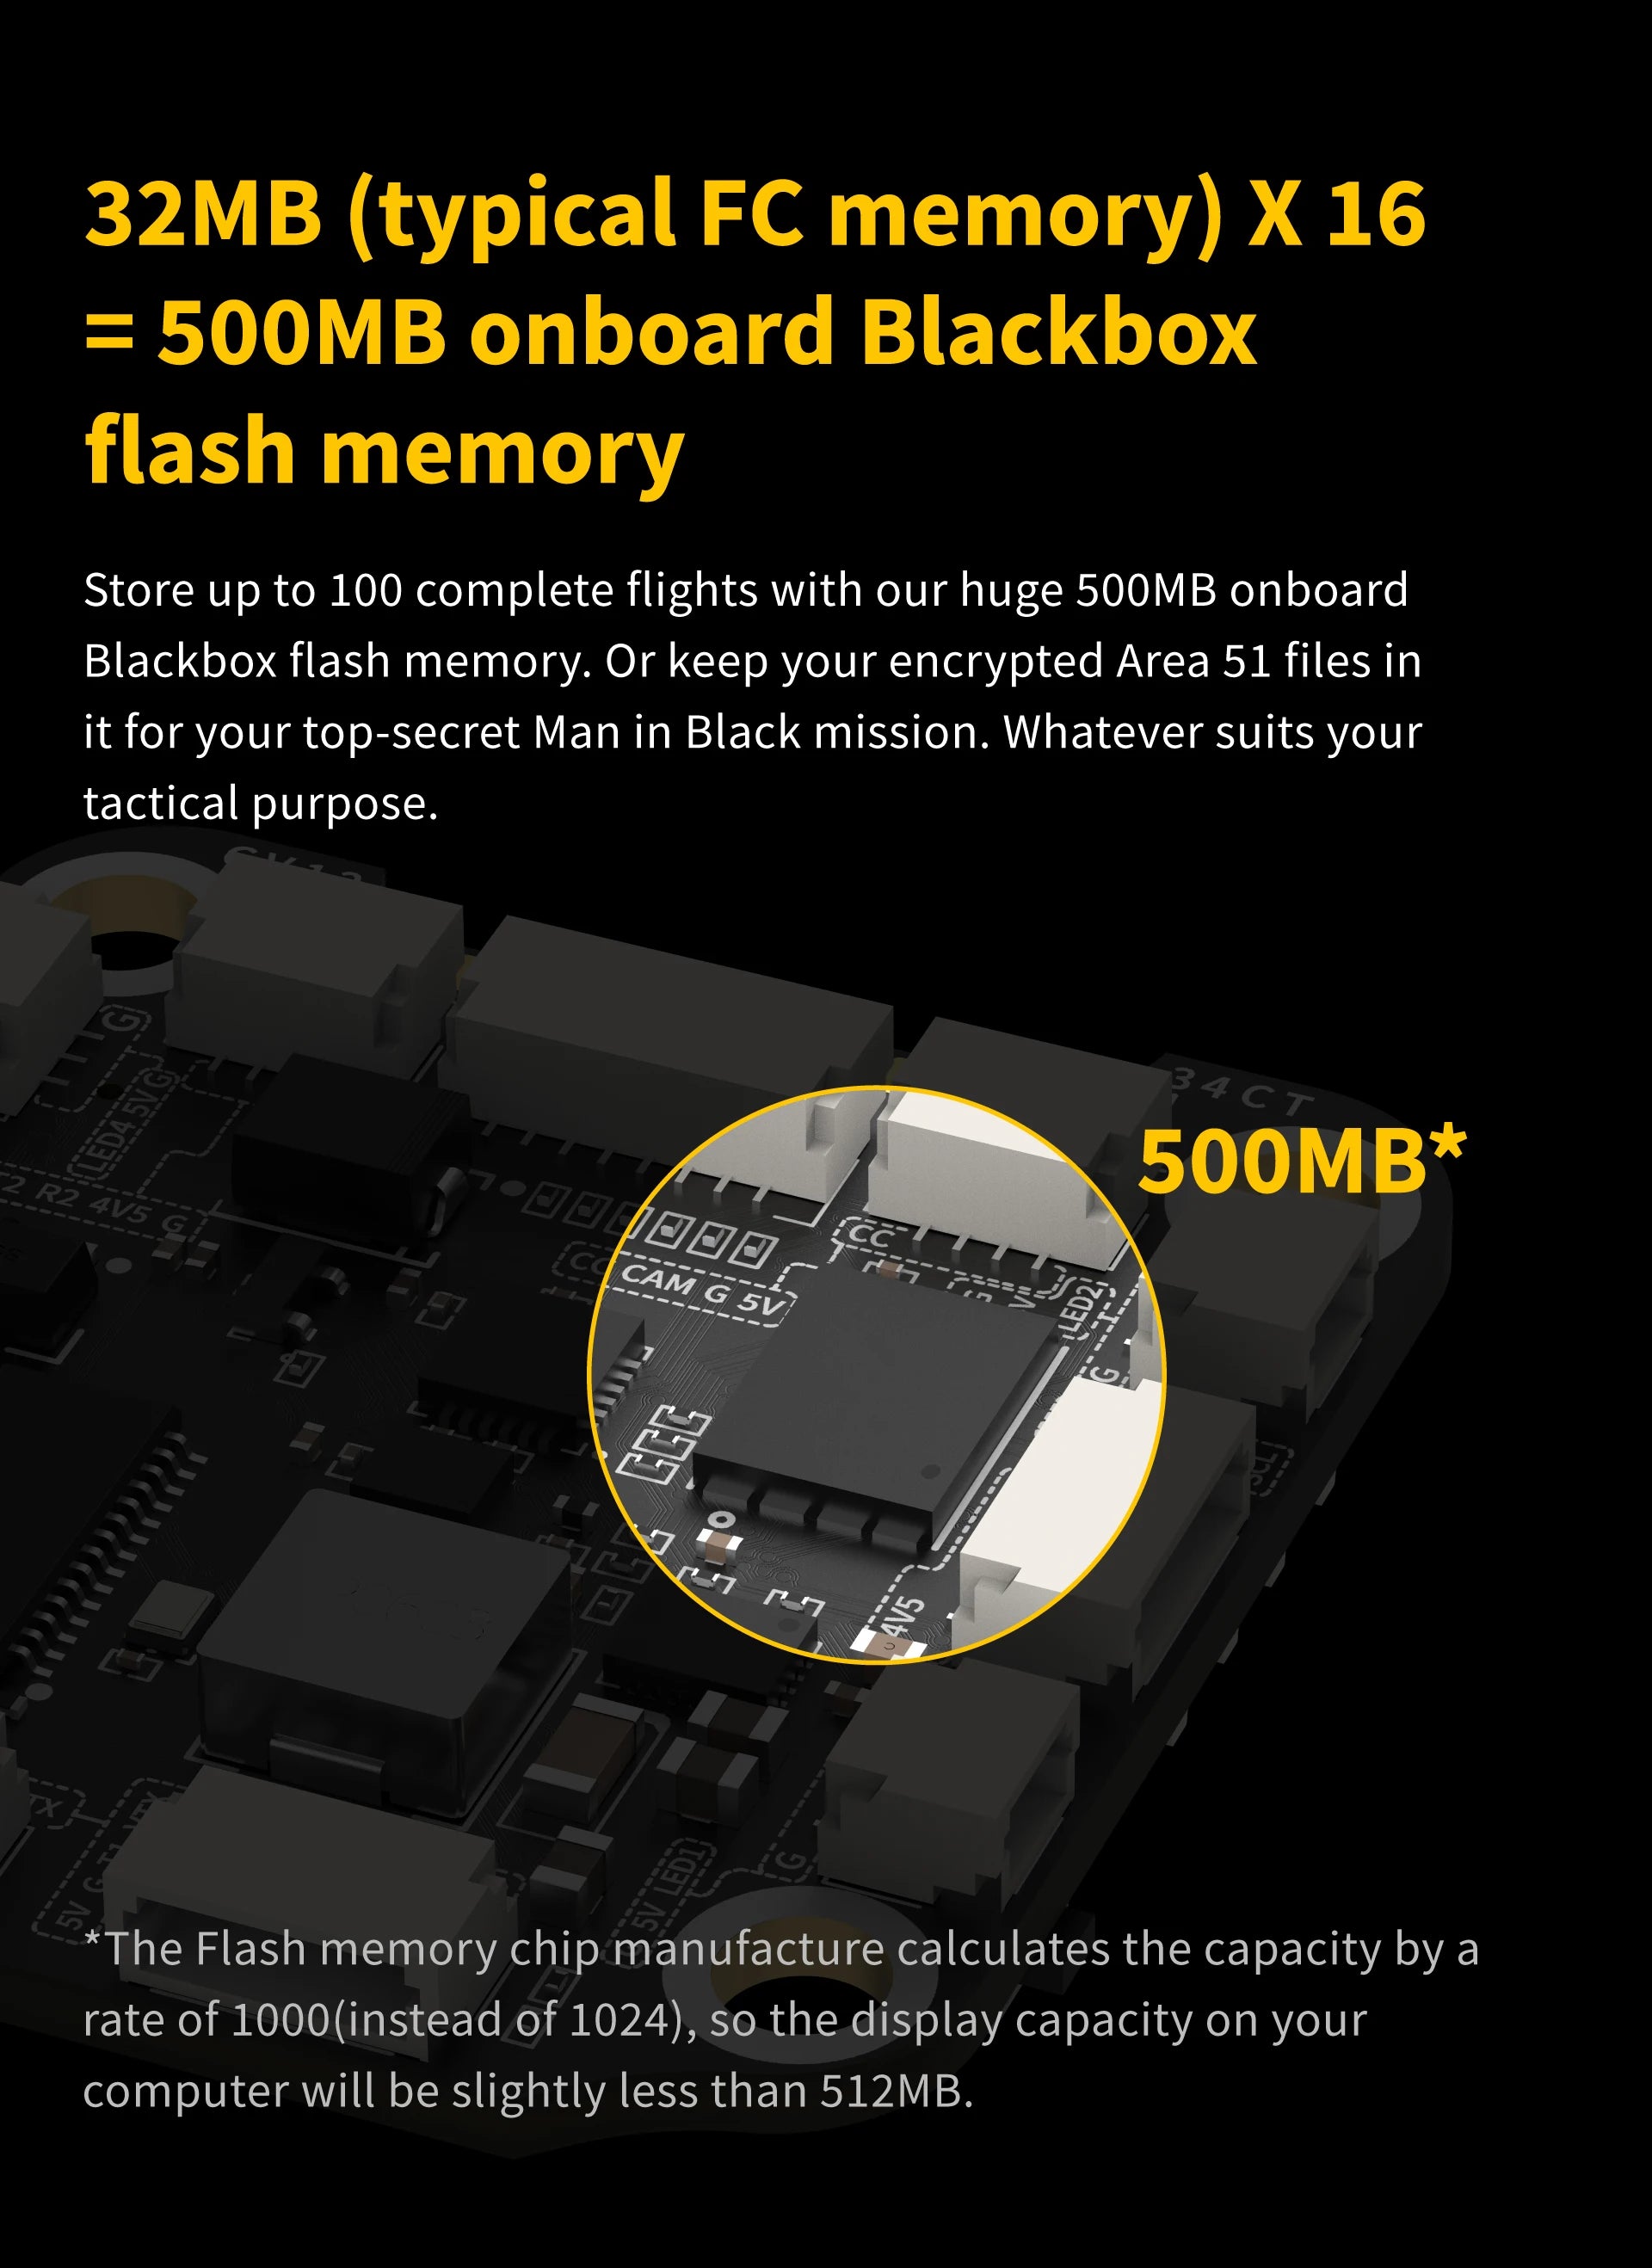 SpeedyBee F7 V3 BL32 50A 30x30 Stack, flash memory manufacture calculates the capacity by a rate of 100O(instead of 10